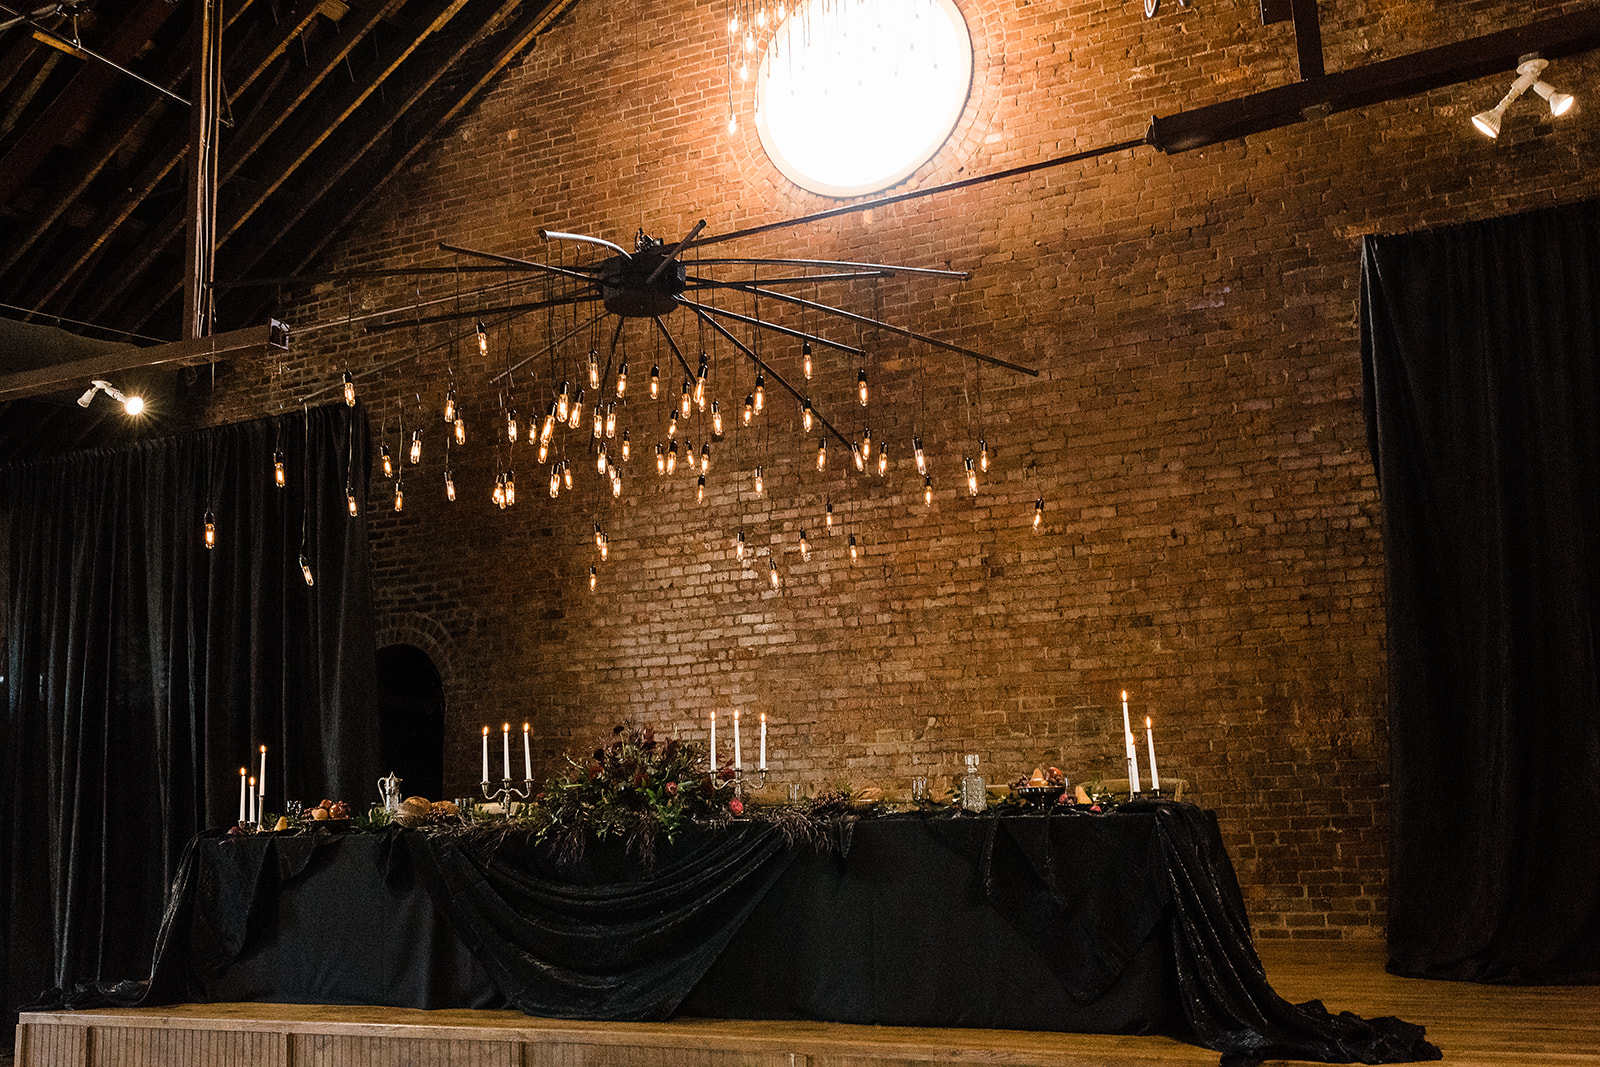 The head table at a wedding decorated in dark, gothic drapery and florals. There is a modern-looking light fixture suspended above the table.